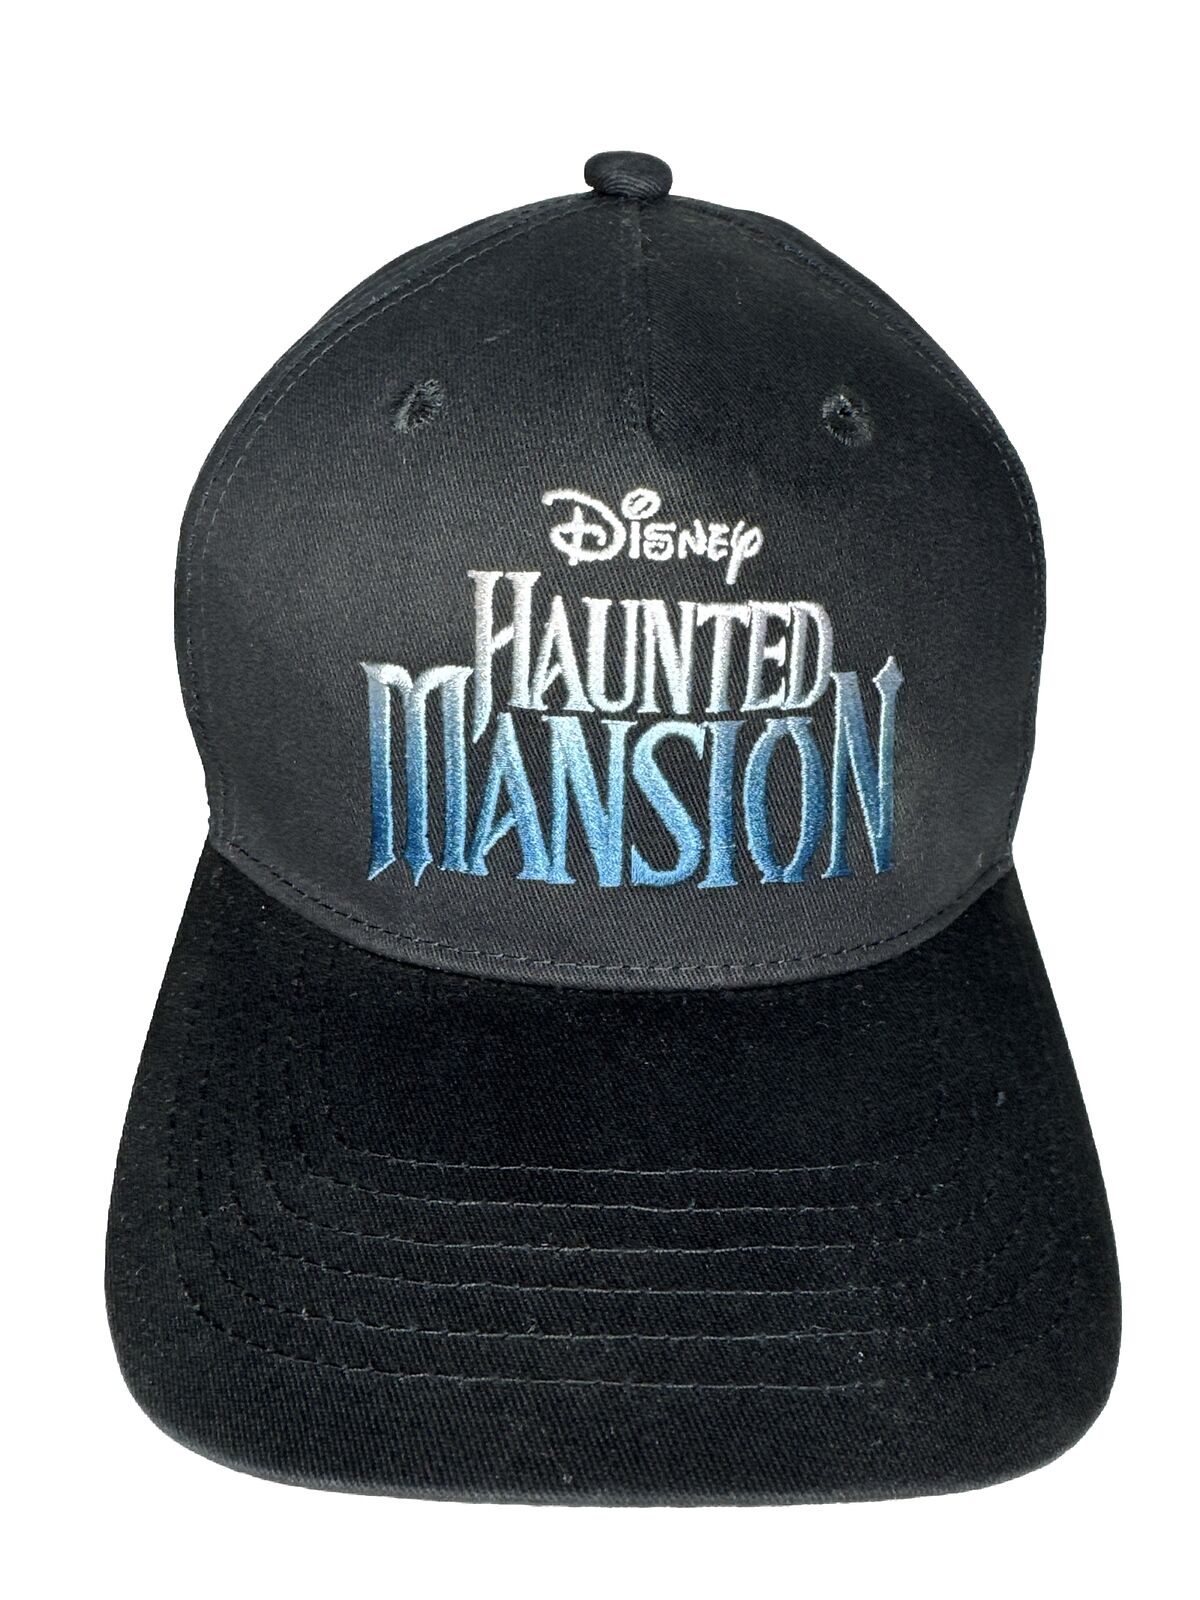 DISNEY MOVIE INSIDERS EXCL HAUNTED MANSION MOVIE LOGO BASEBALL CAP ADULT SIZE